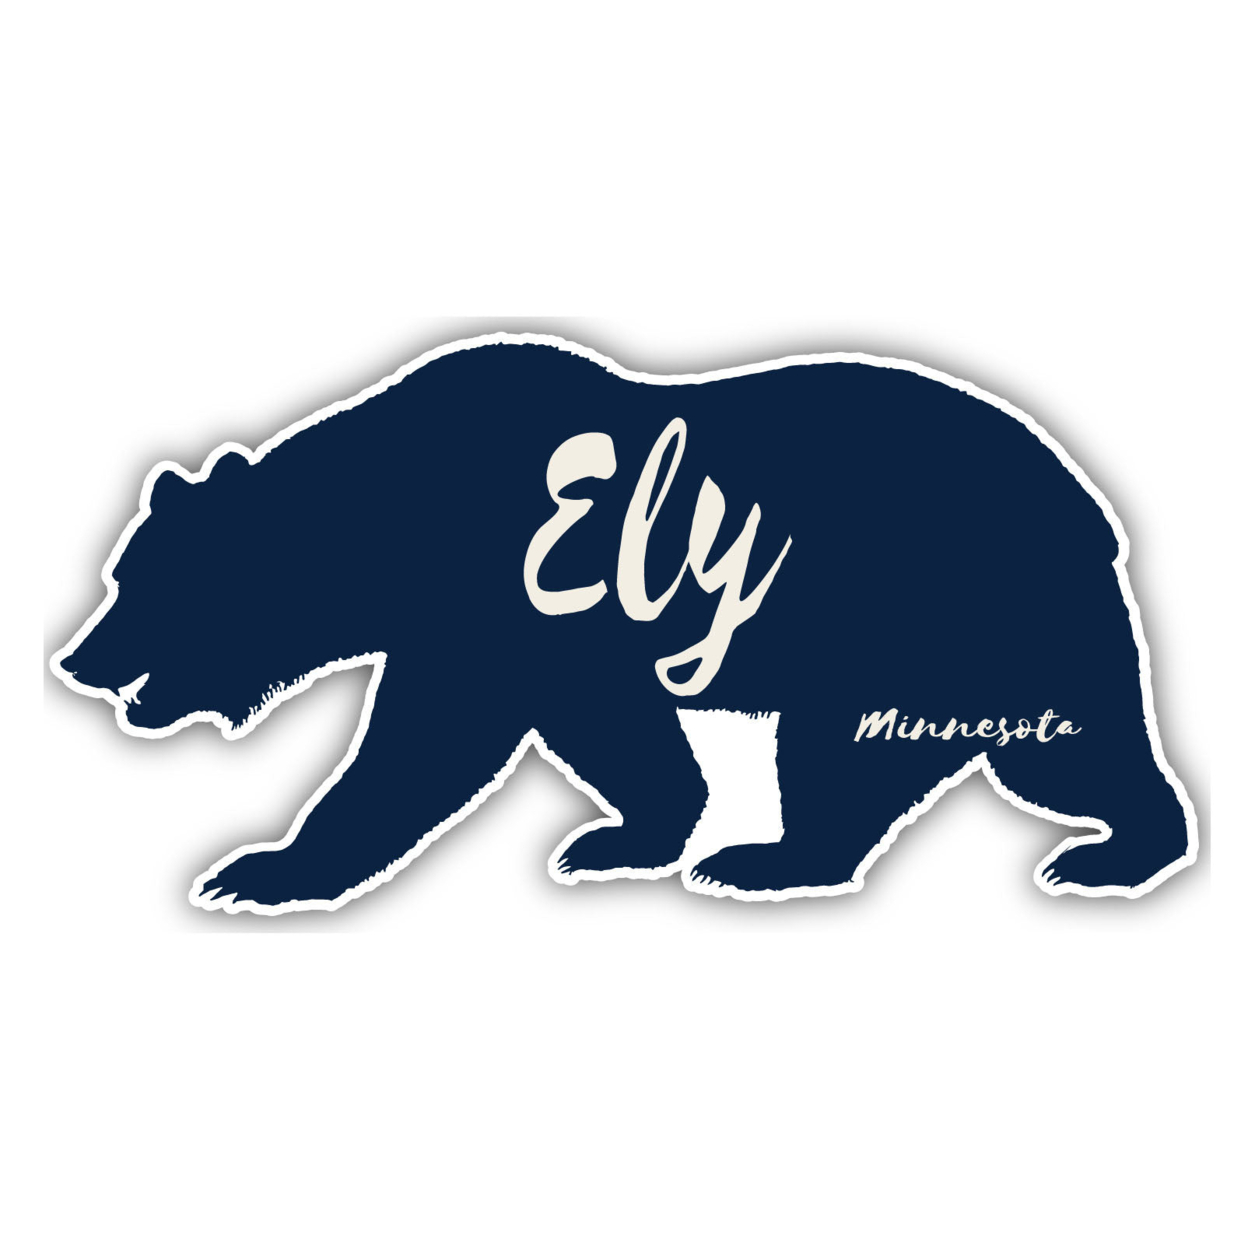 Ely Minnesota Souvenir Decorative Stickers (Choose Theme And Size) - 4-Pack, 10-Inch, Camp Life